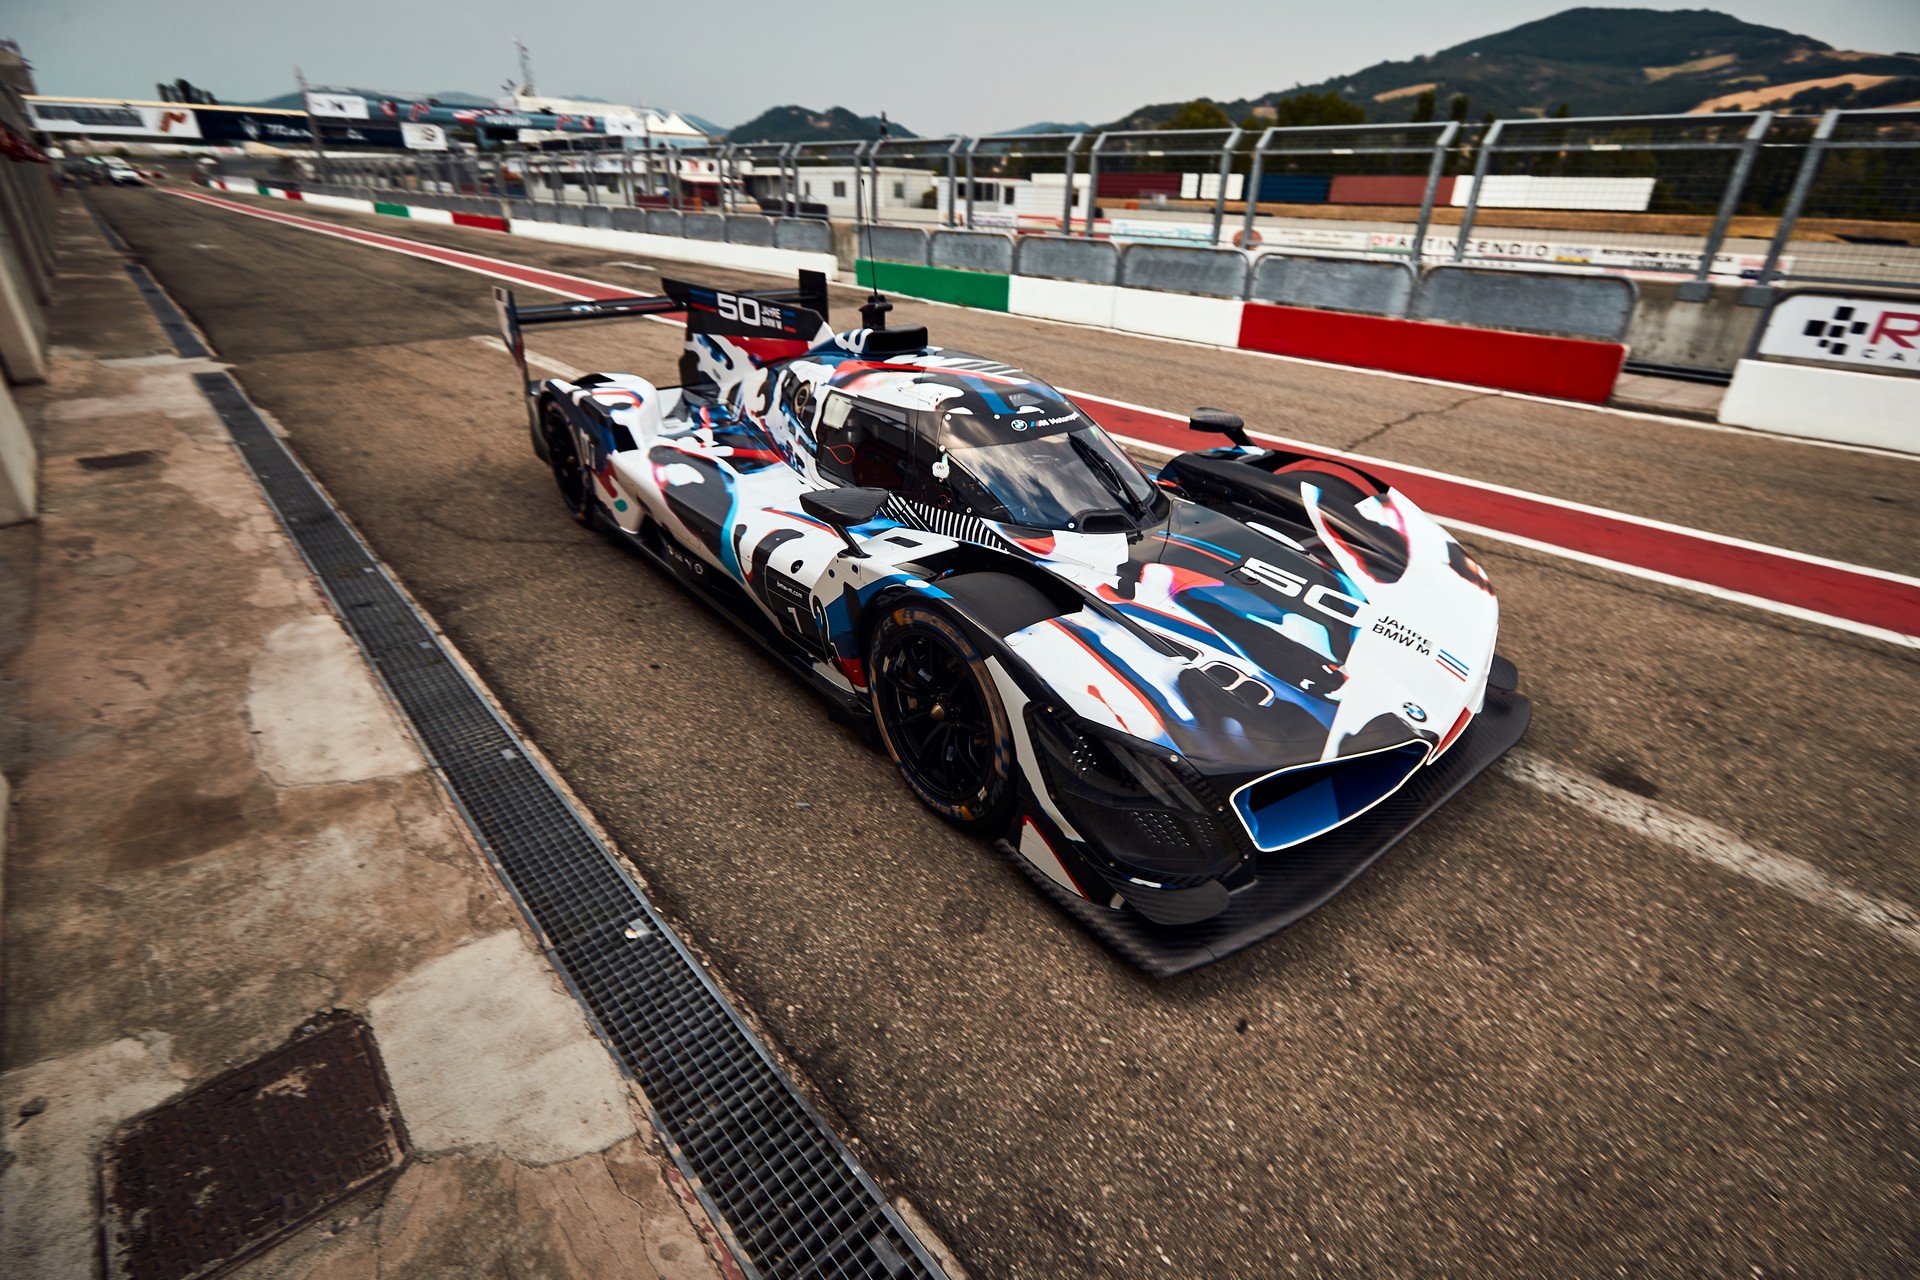 BMW Returning To Le Mans In 2024 With M Hybrid V8 Car Care and Trends in the